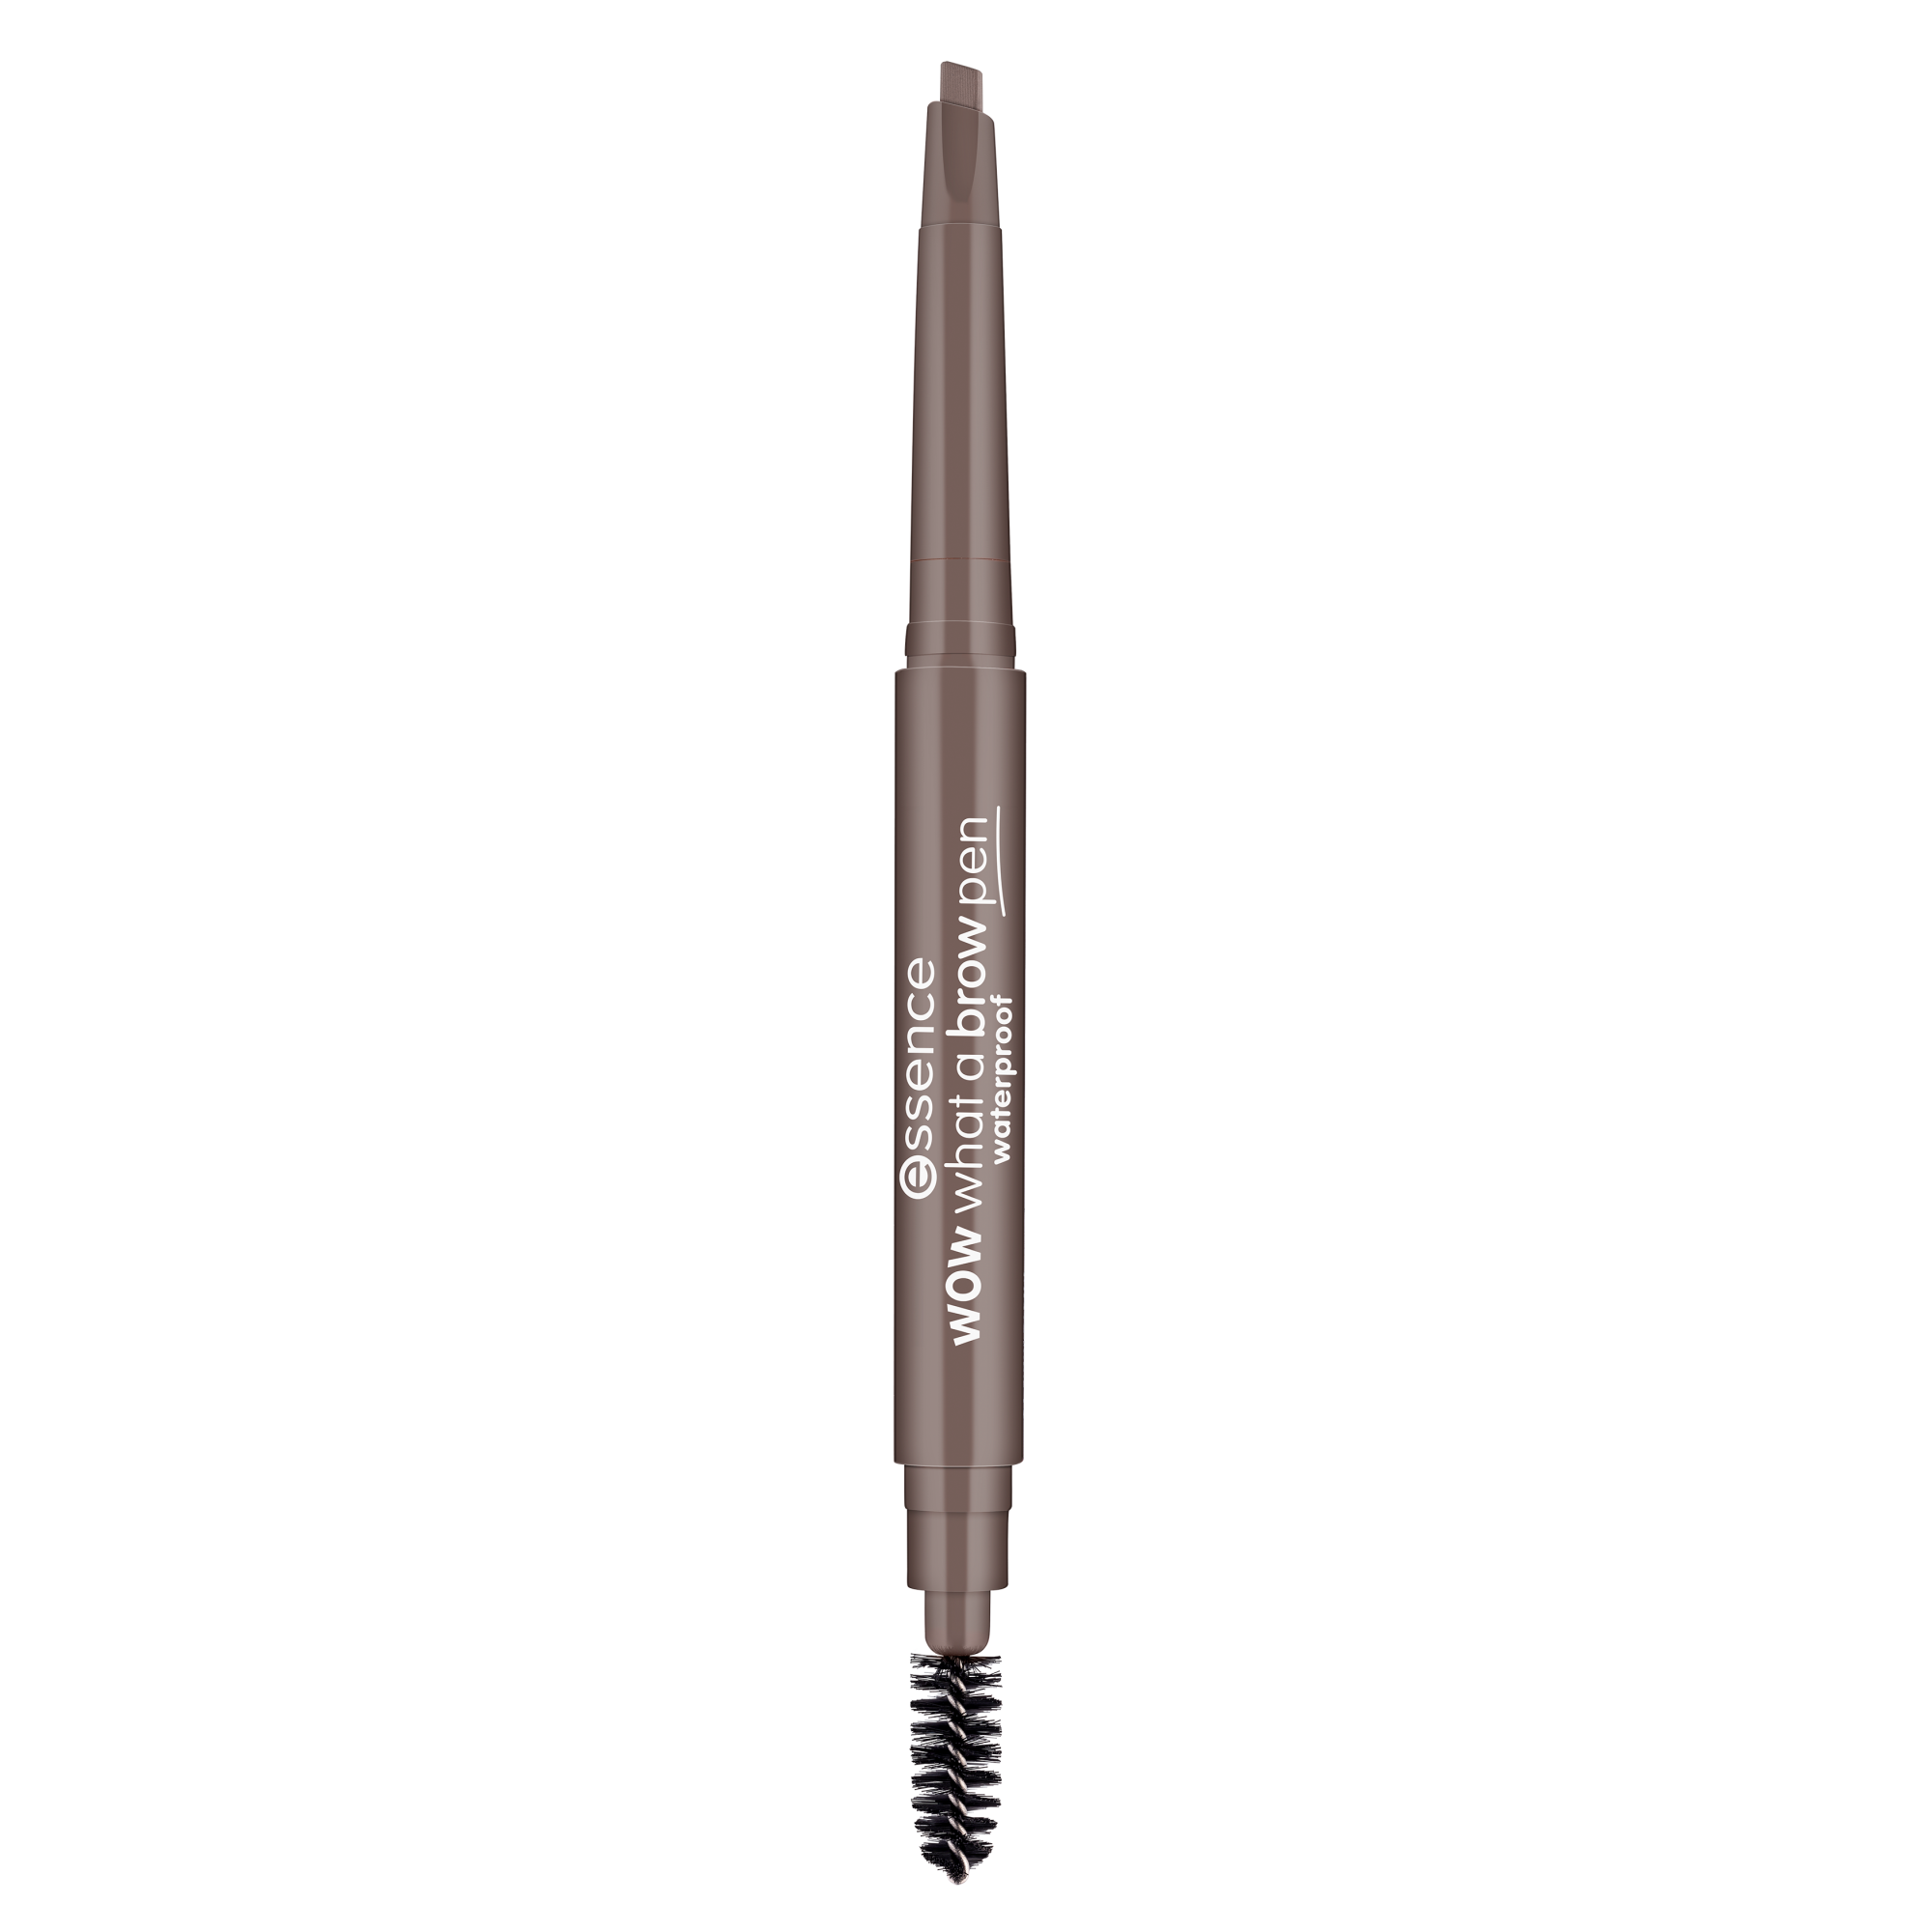 wow what a brow pen waterproof